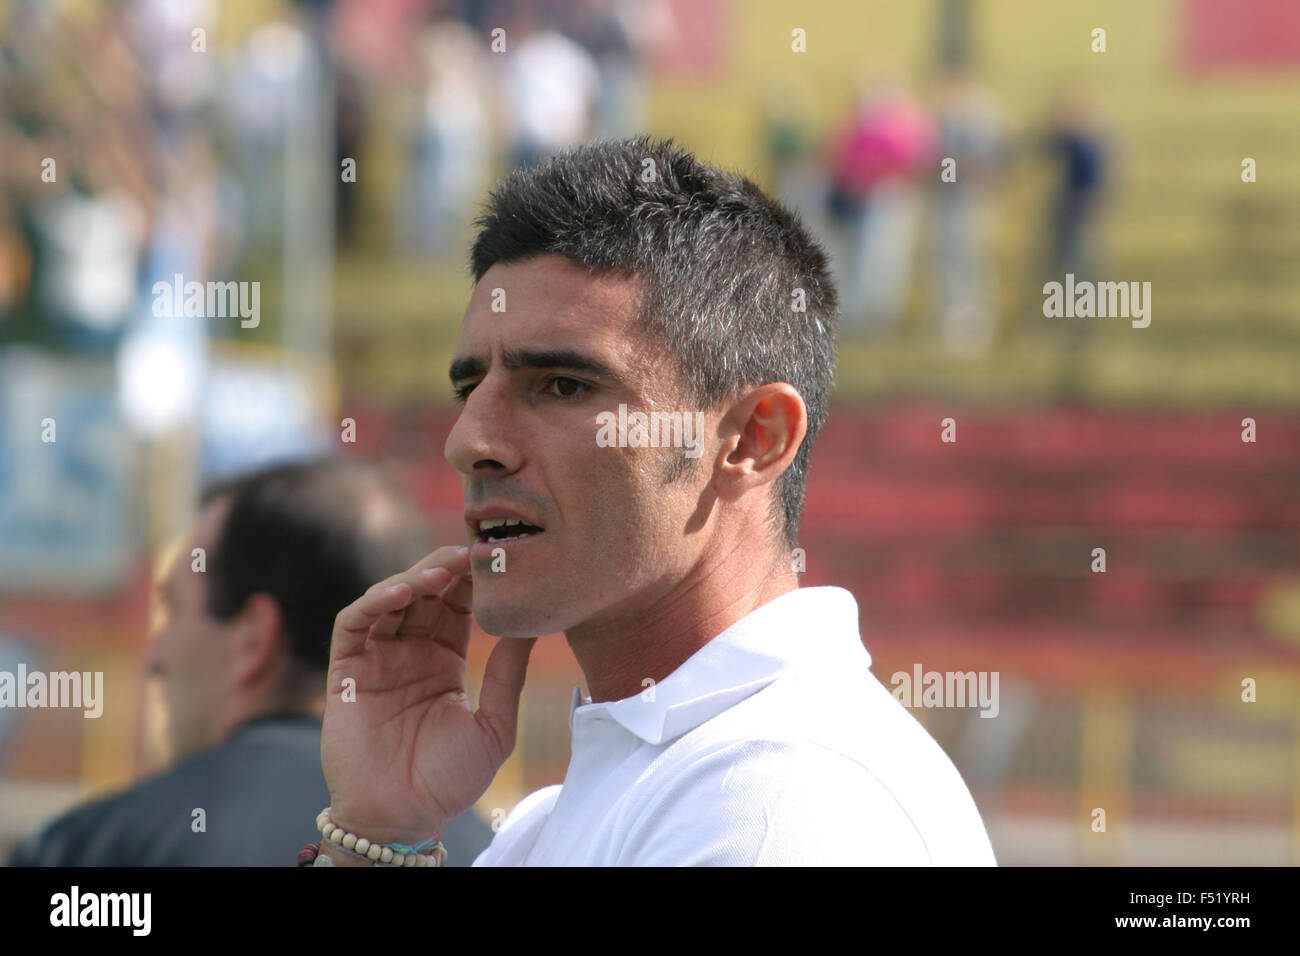 Naples, Italy. 26th Oct, 2015. Former Italy captain Fabio Cannavaro (not seen) has been named manager of Saudi Arabia champions Al-Nassr, according to reports. During his club career, Cannavaro won La Liga twice with Real Madrid, and the UEFA Cup with Parma, while also having stints with Juventus, Napoli and Inter Milan. In 2006, he won the Ballon d'Or. Read more at: https://tr.im/3V2cw Credit:  Salvatore Esposito/Pacific Press/Alamy Live News Stock Photo